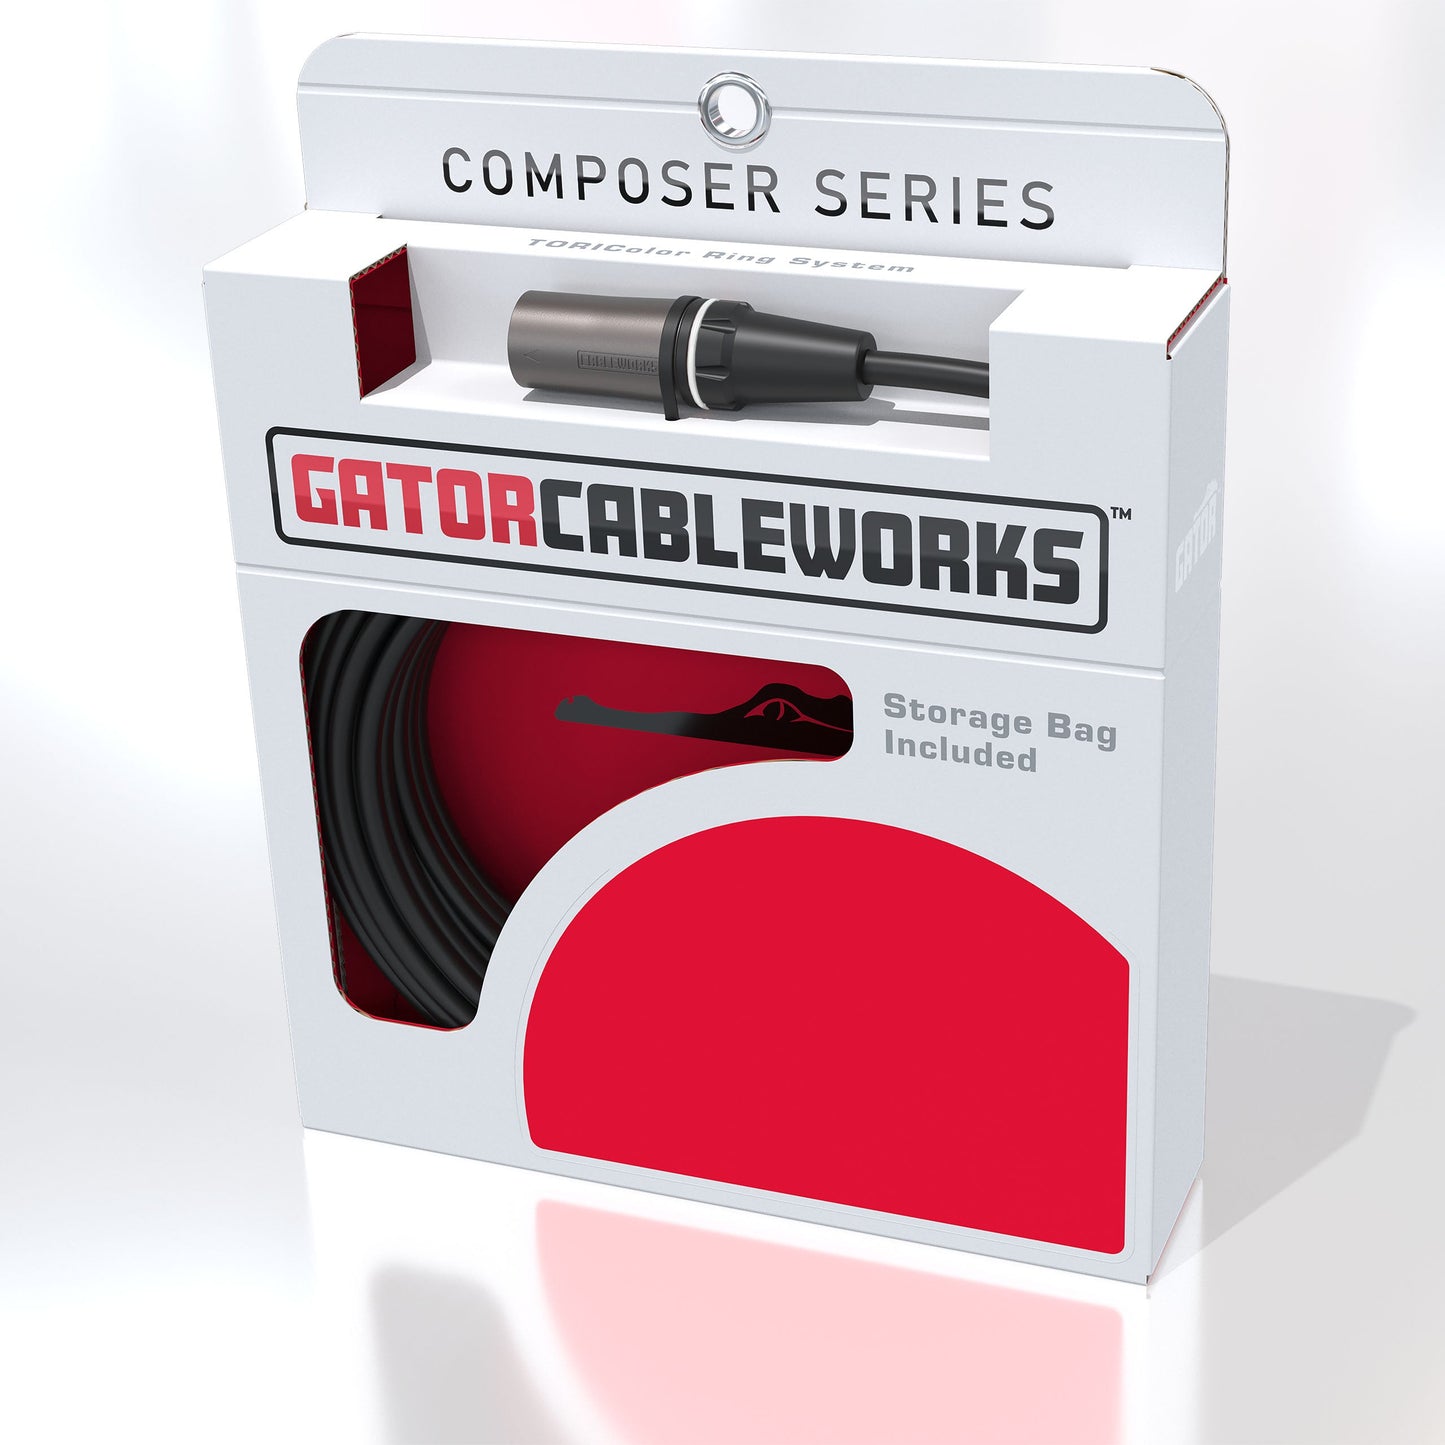 Gator Cableworks 30 foot XLR cable in a white and red box.